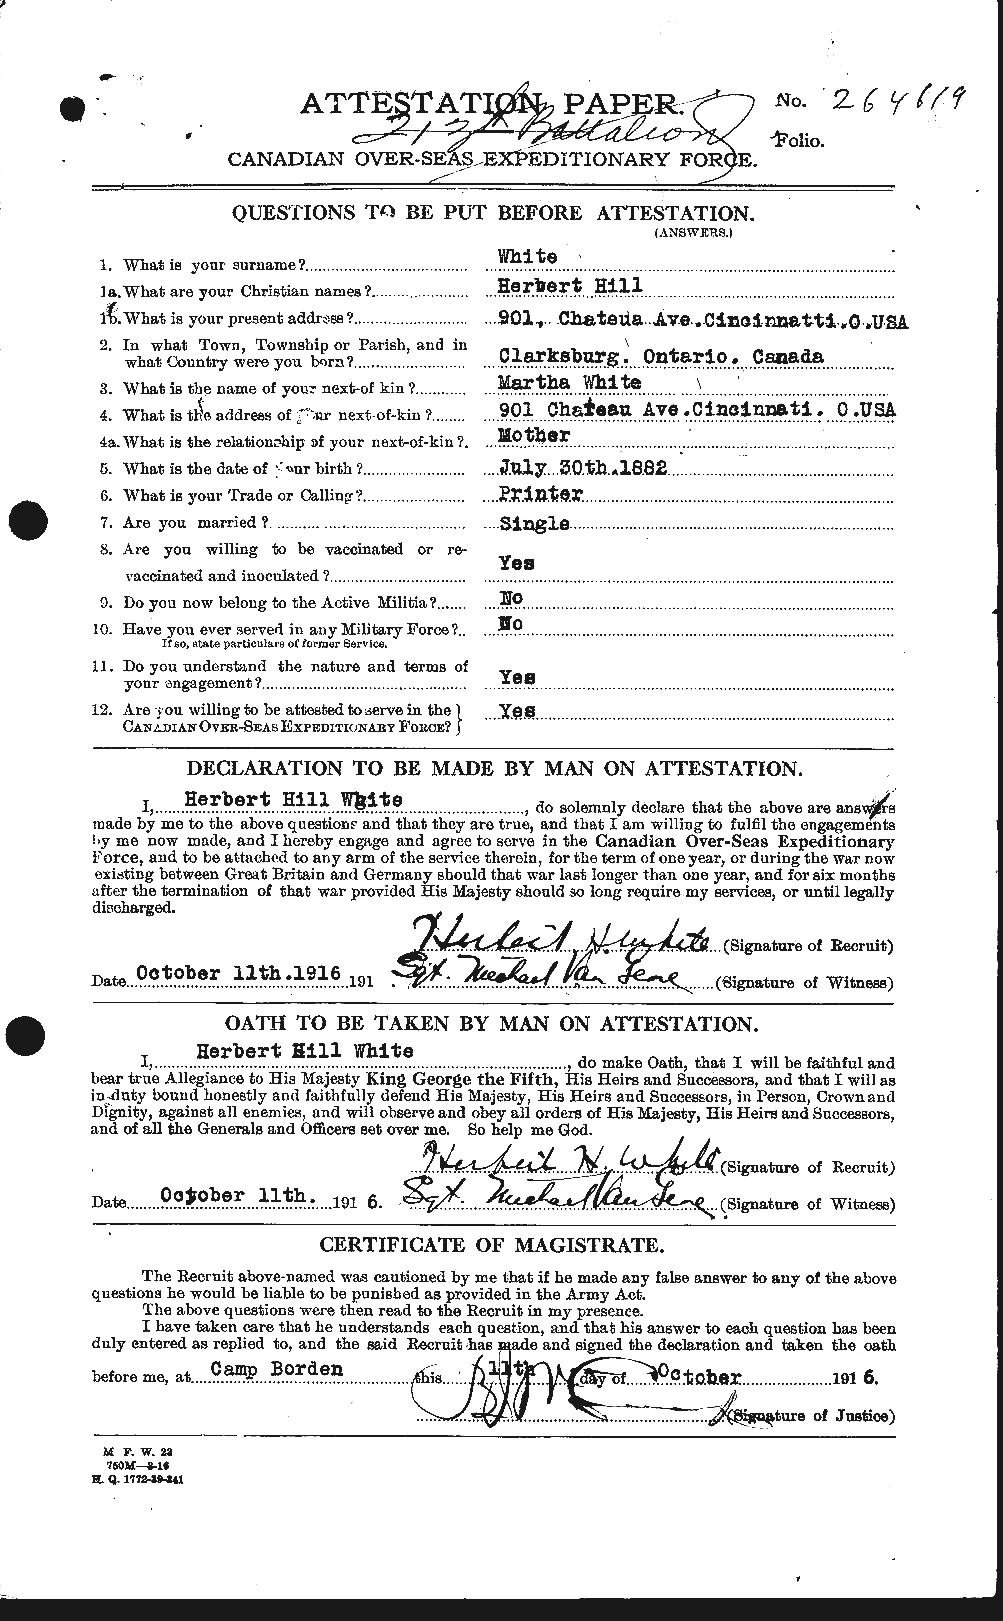 Personnel Records of the First World War - CEF 669676a